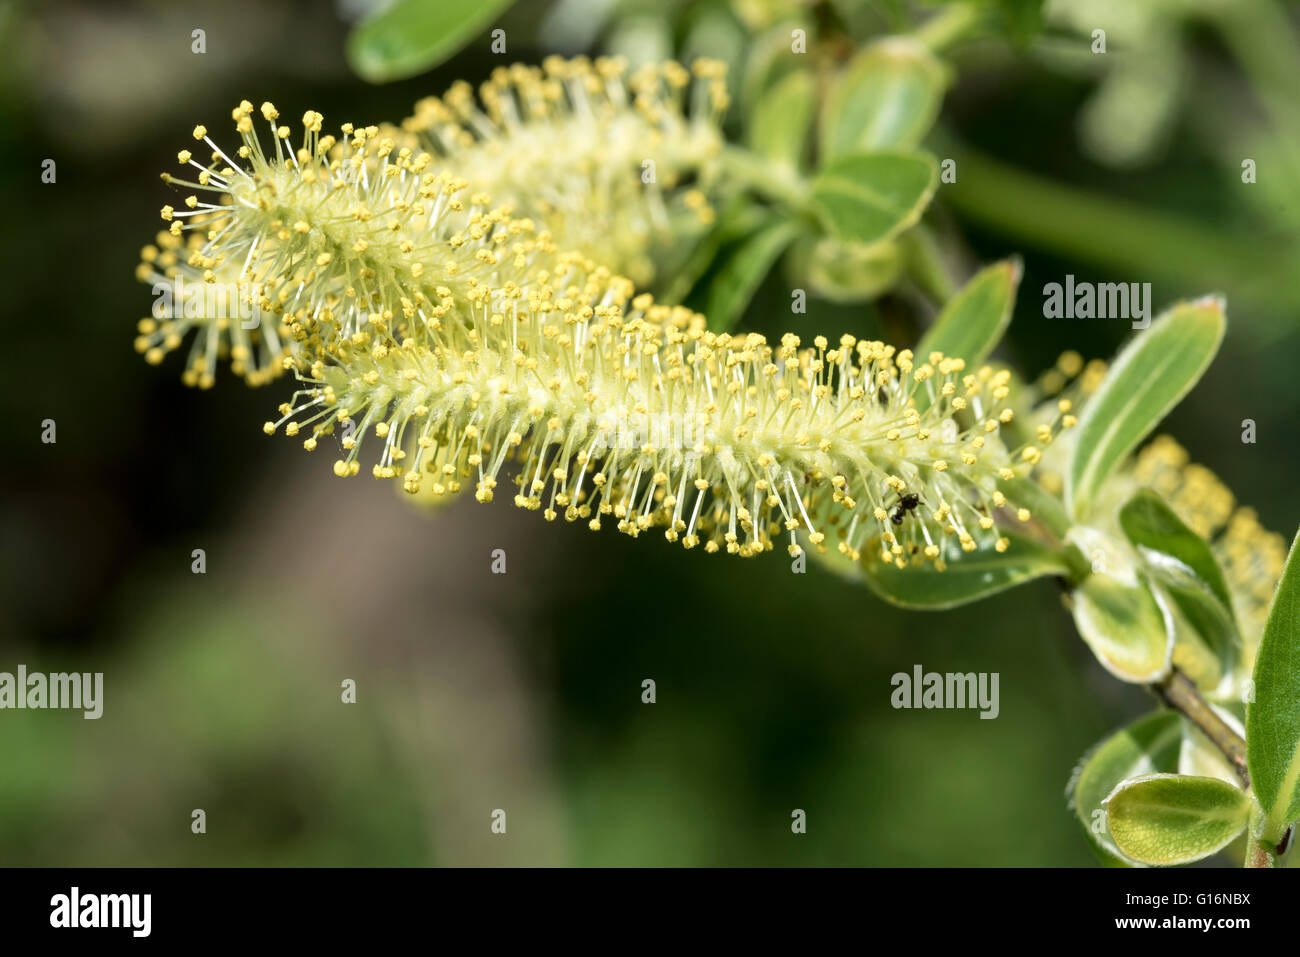 A male Willow catkin Stock Photo